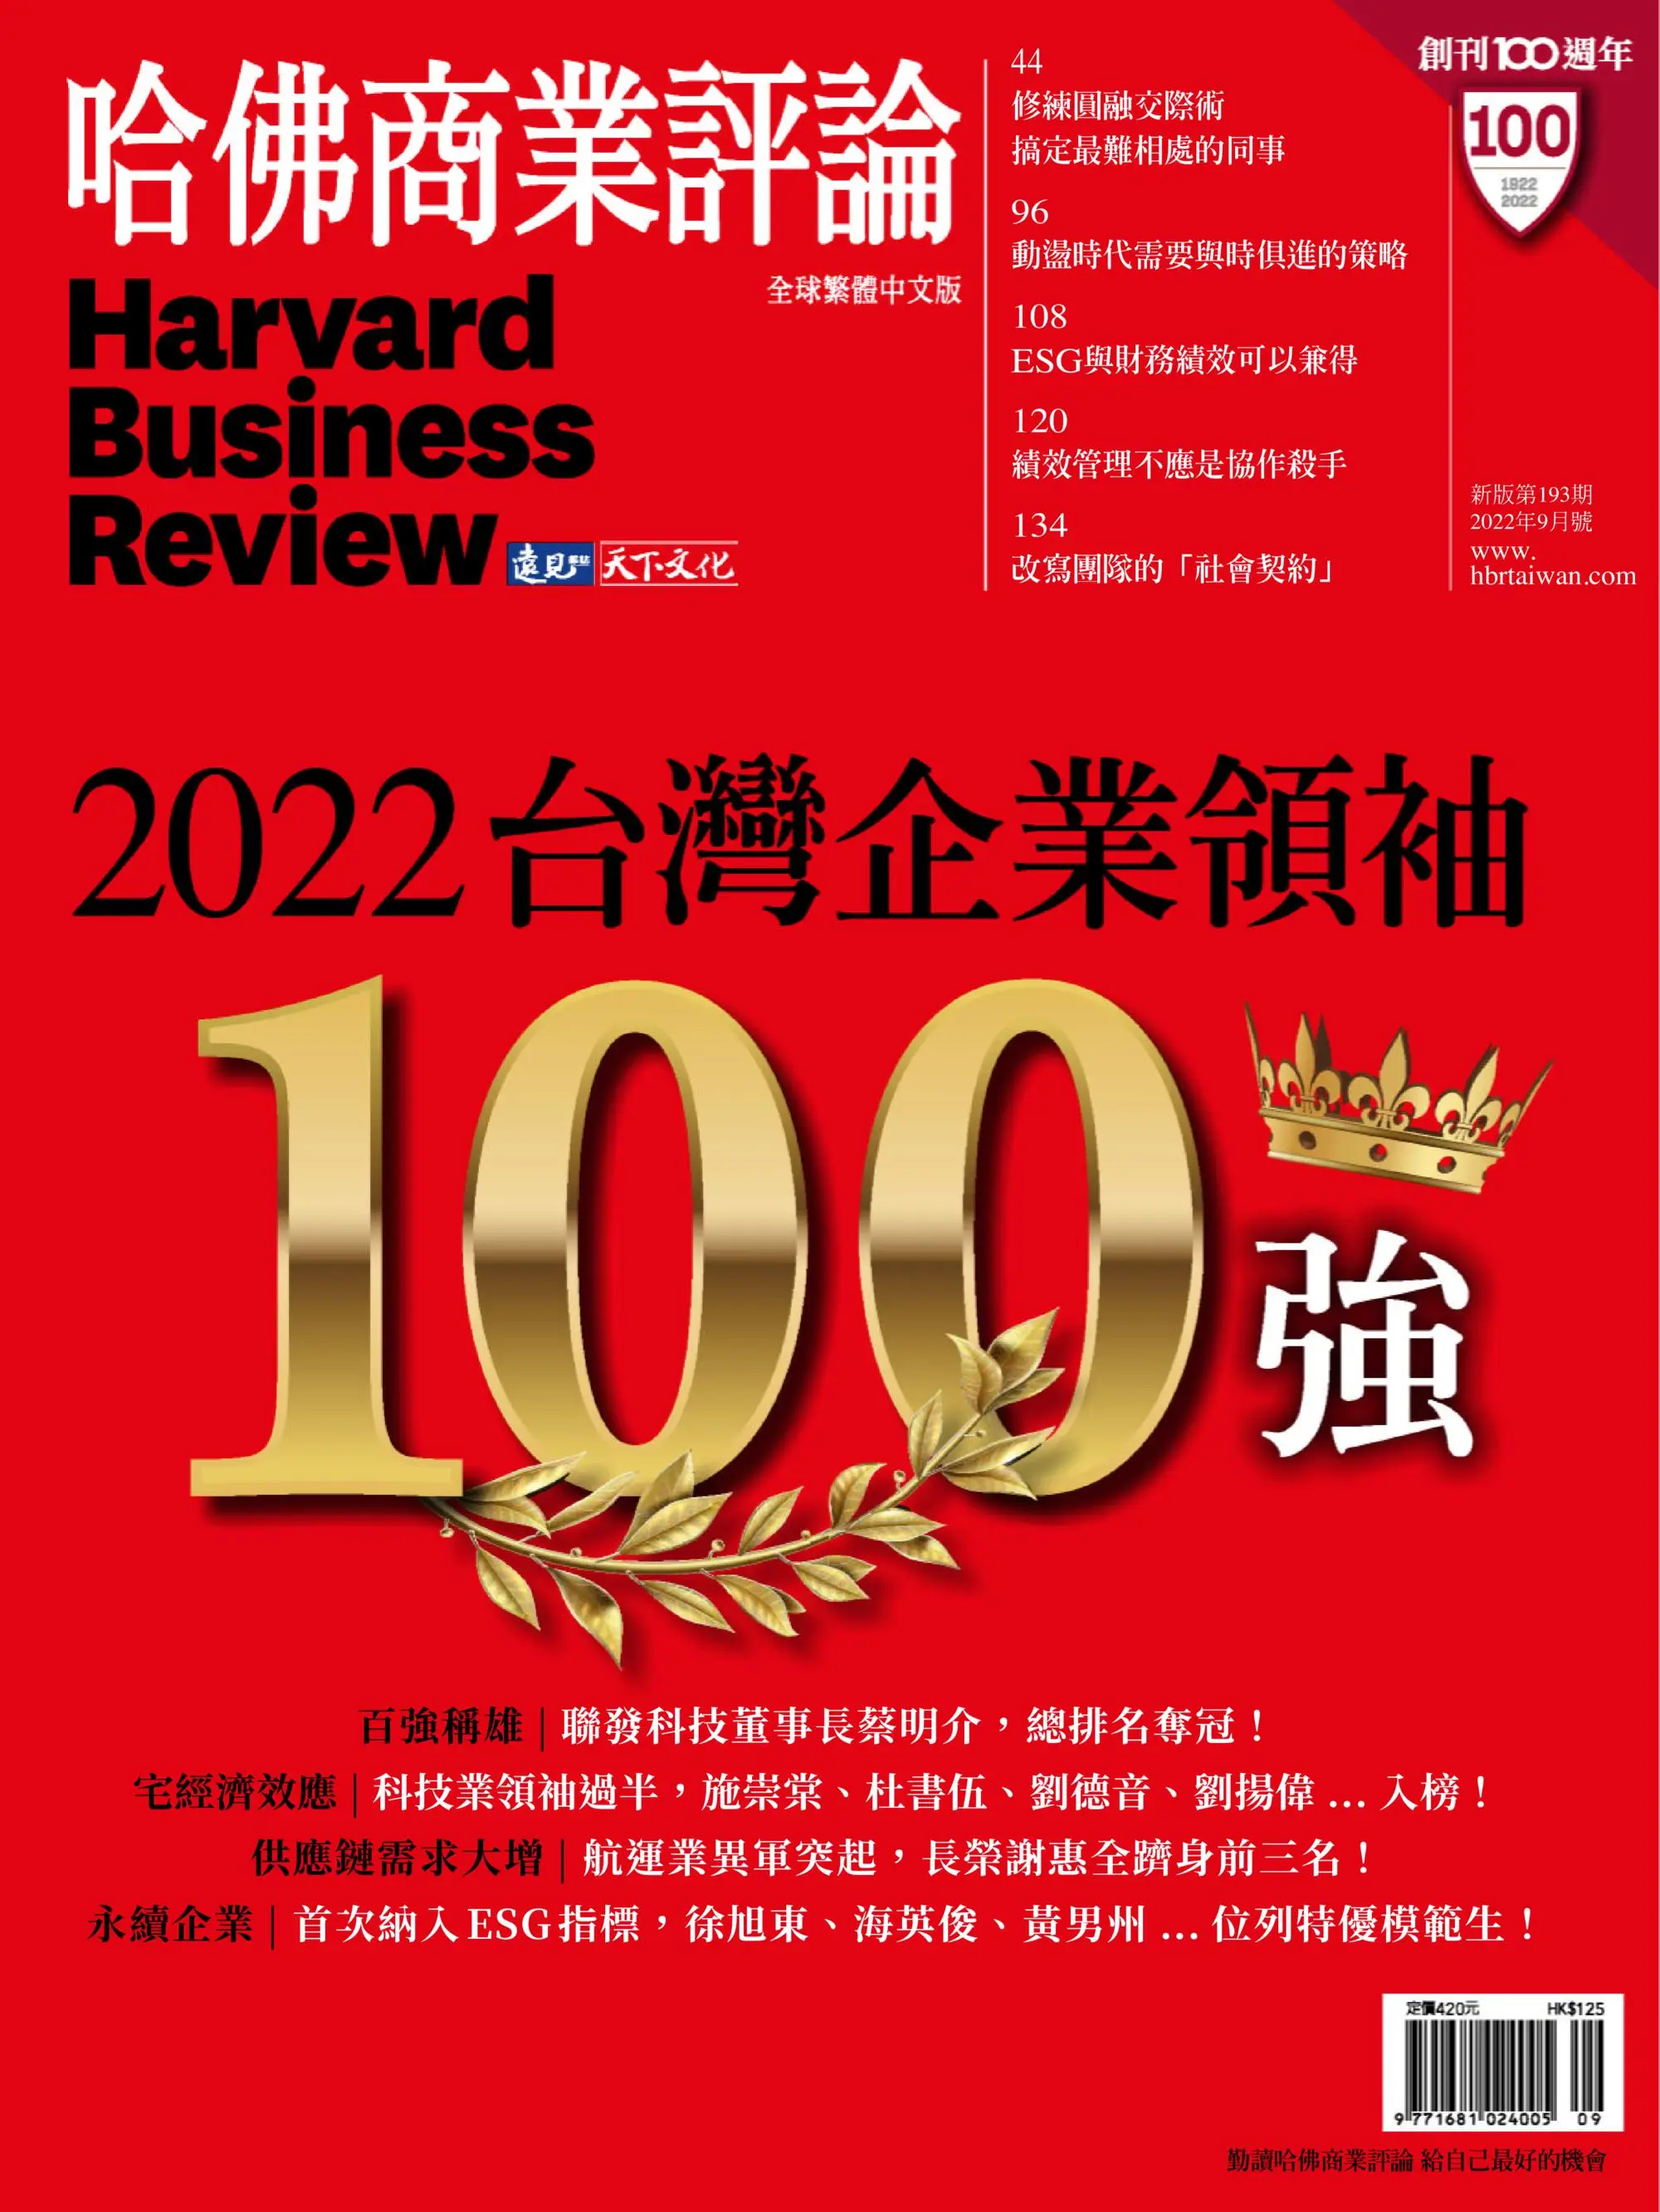 Harvard Business Review Complex Chinese Edition 哈佛商業評論 2022年九月